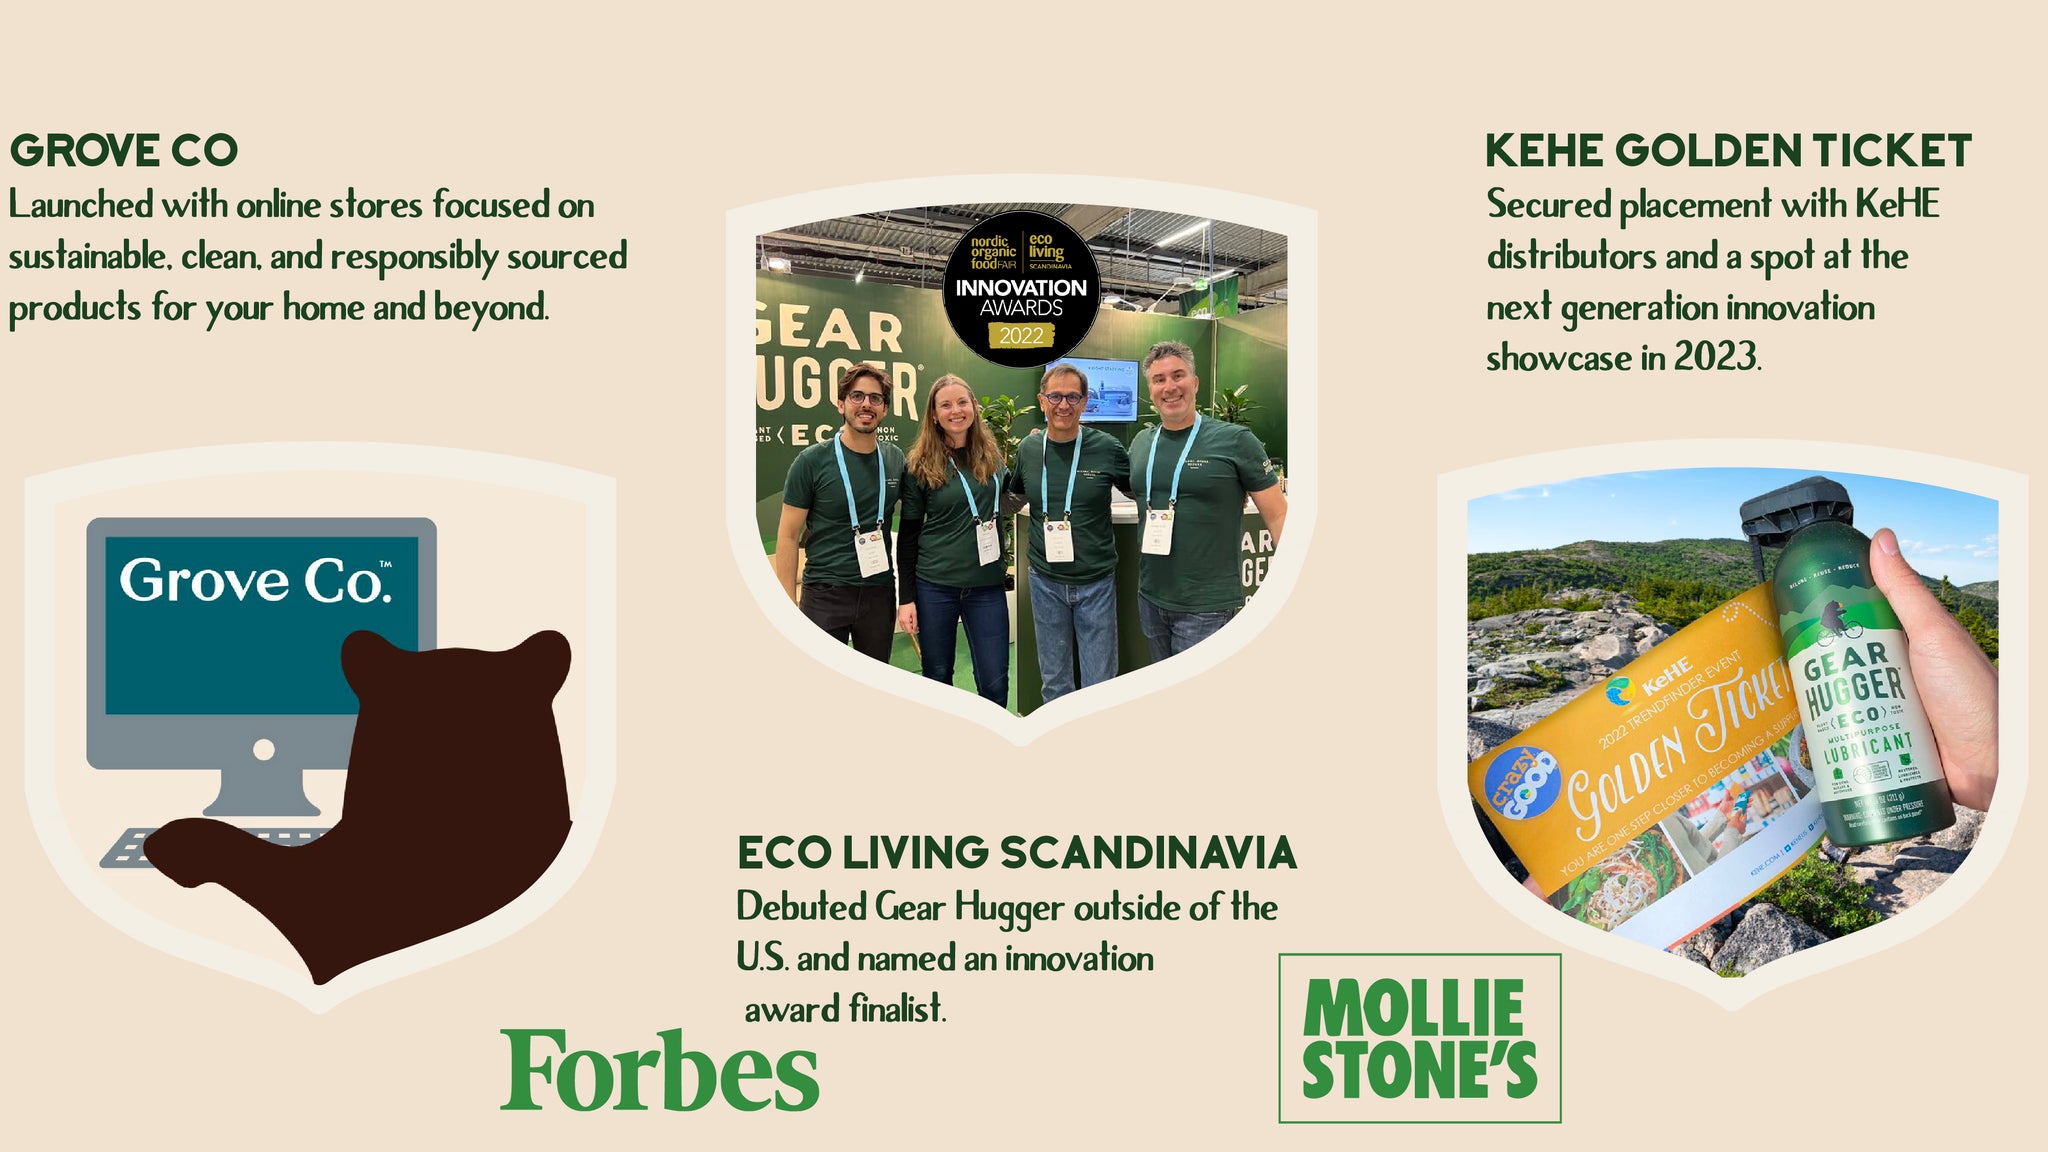   KeHE Golden Ticket Secured placement with KeHE distributors and a spot at the next generation innovation showcase in 2023. Eco Living Scandinavia Debuted Gear Hugger outside of the U.S. and named an innovation award finalist.Grove Co Launched with online store focused on sustainable, clean, and responsibly sourced products for your home and beyond.